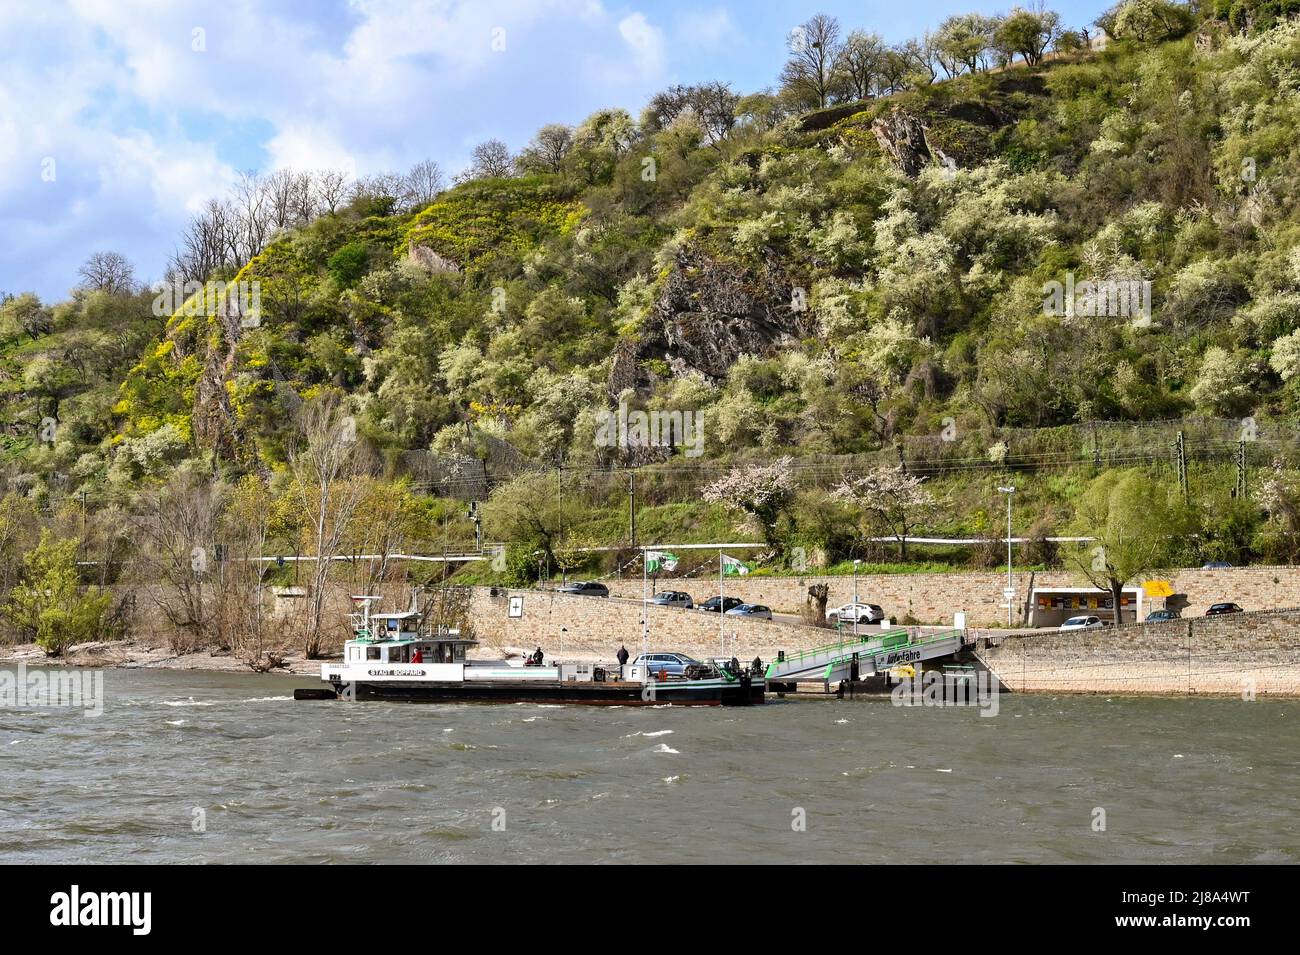 Boppard, Germany - April 2022: Small car ferry being loaded in Boppard, which takes pedestrians and cars over the River Rhine Stock Photo